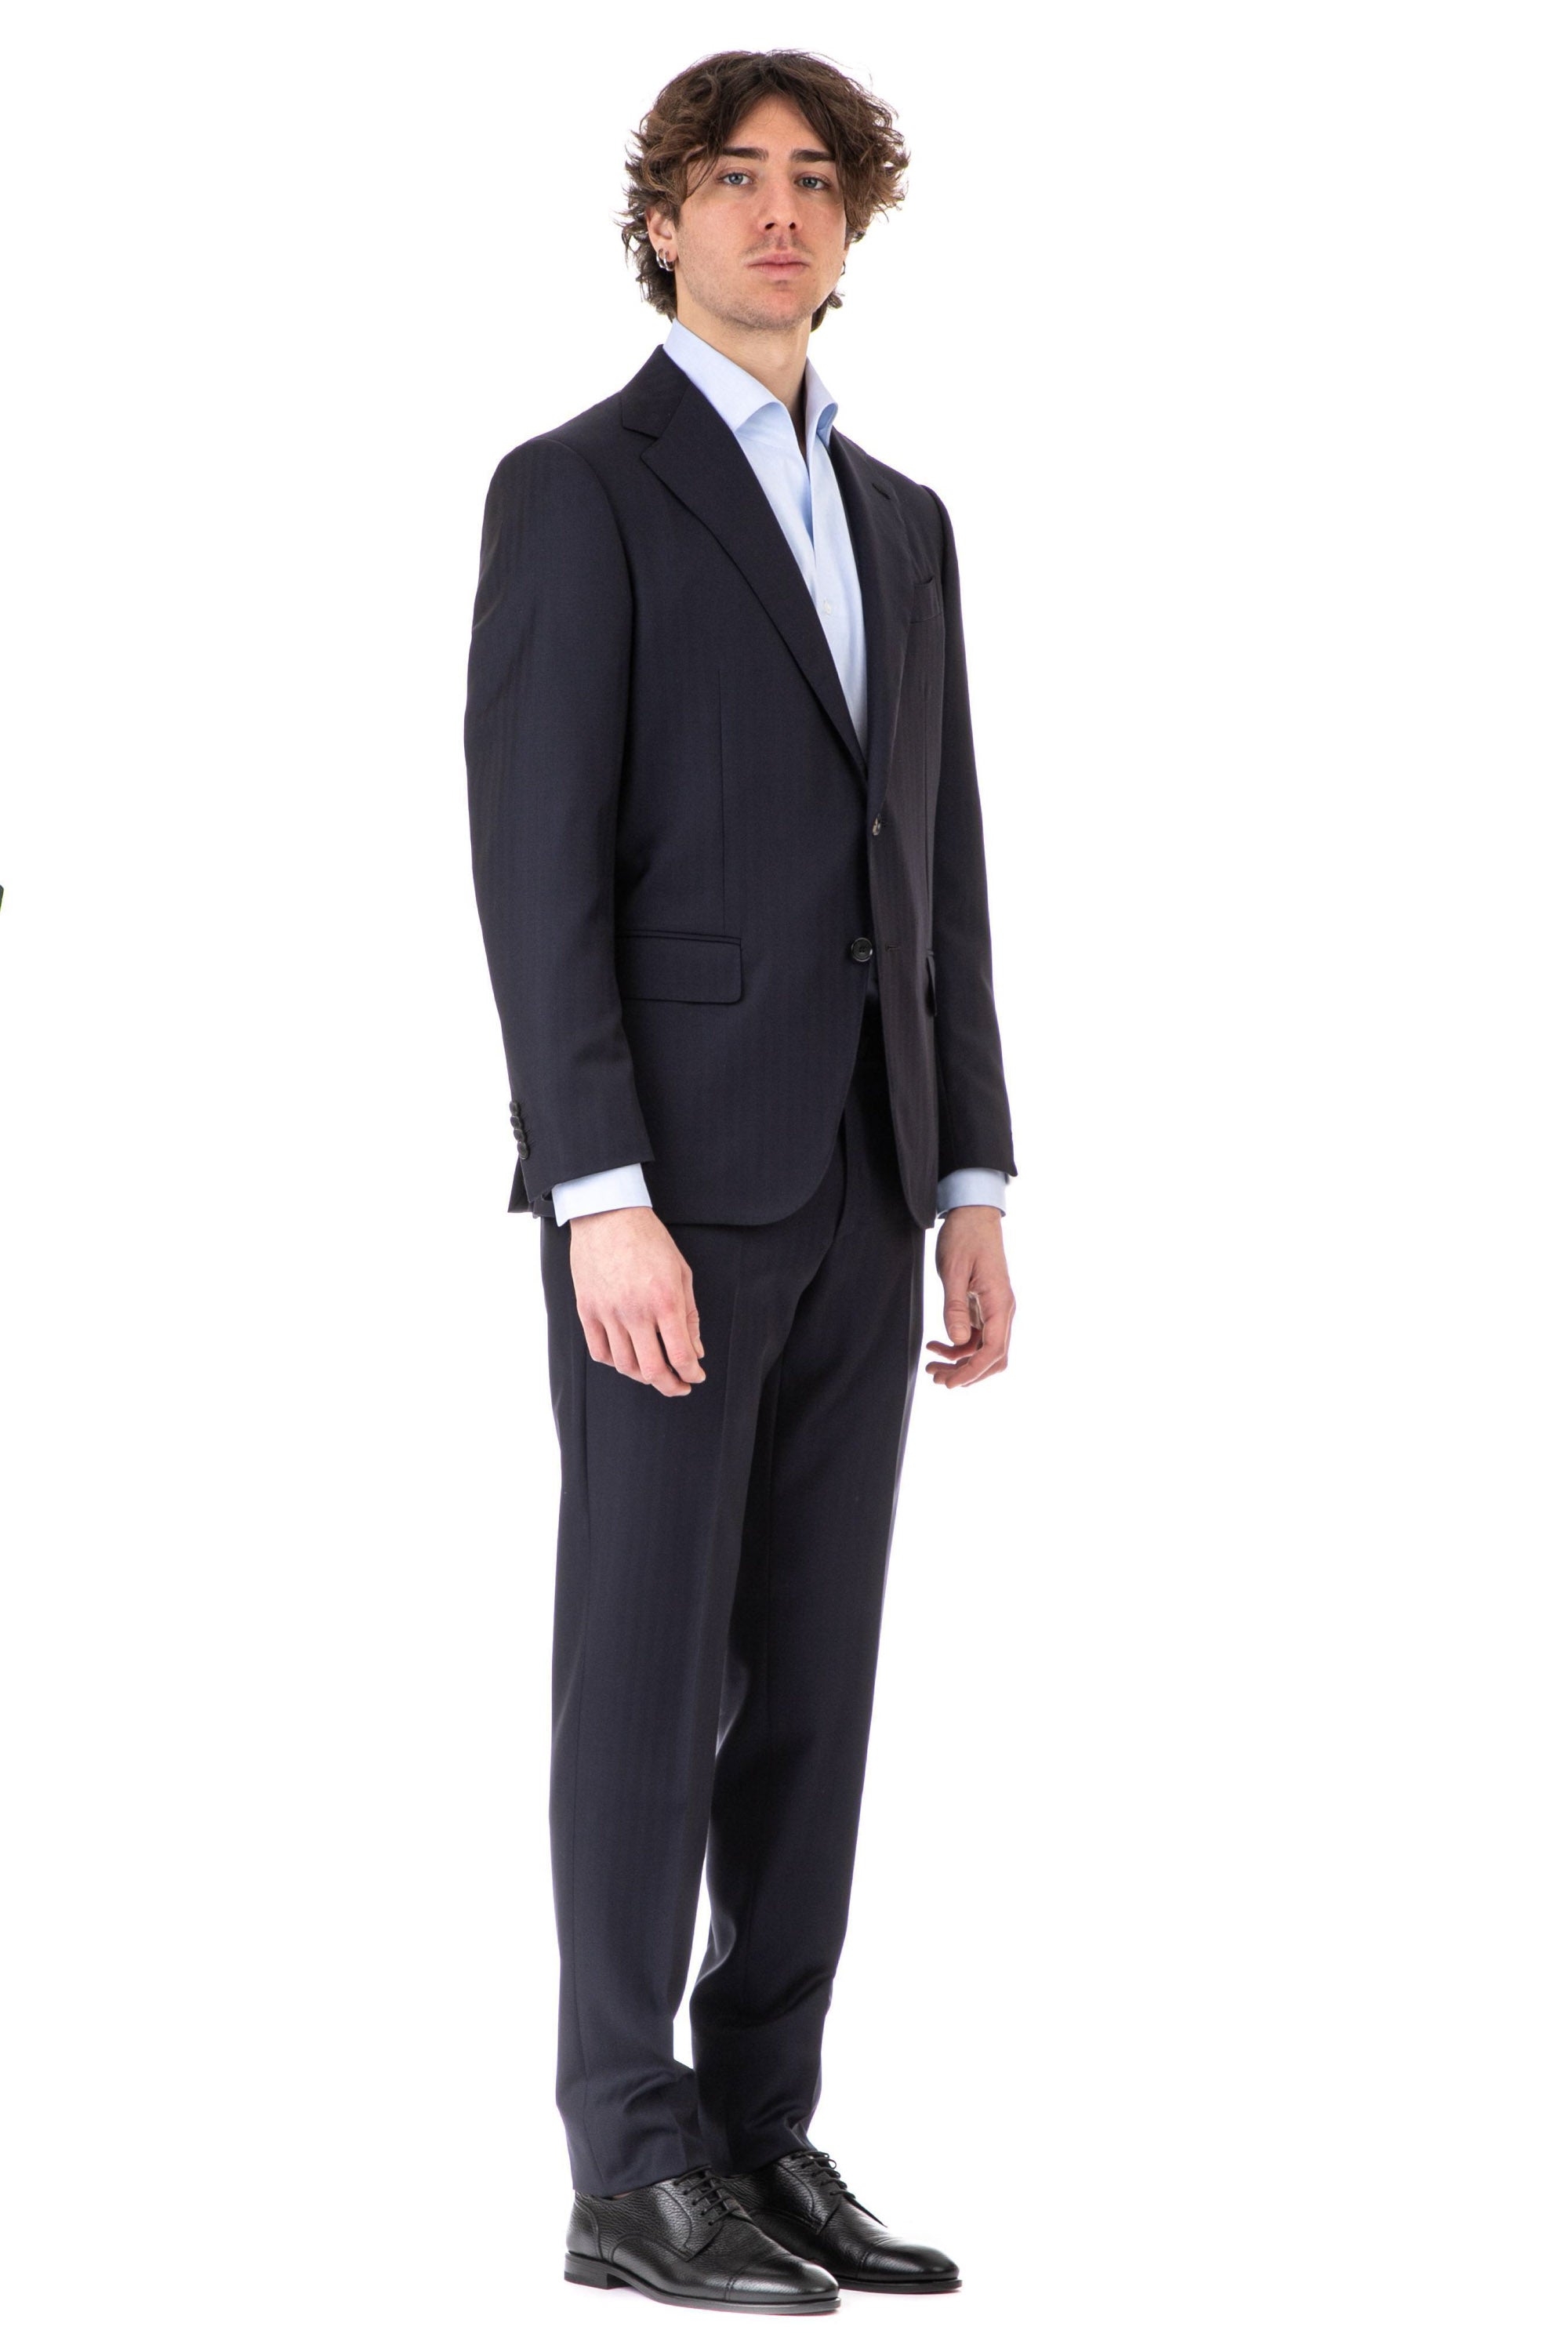 Norma model tailored wool suit